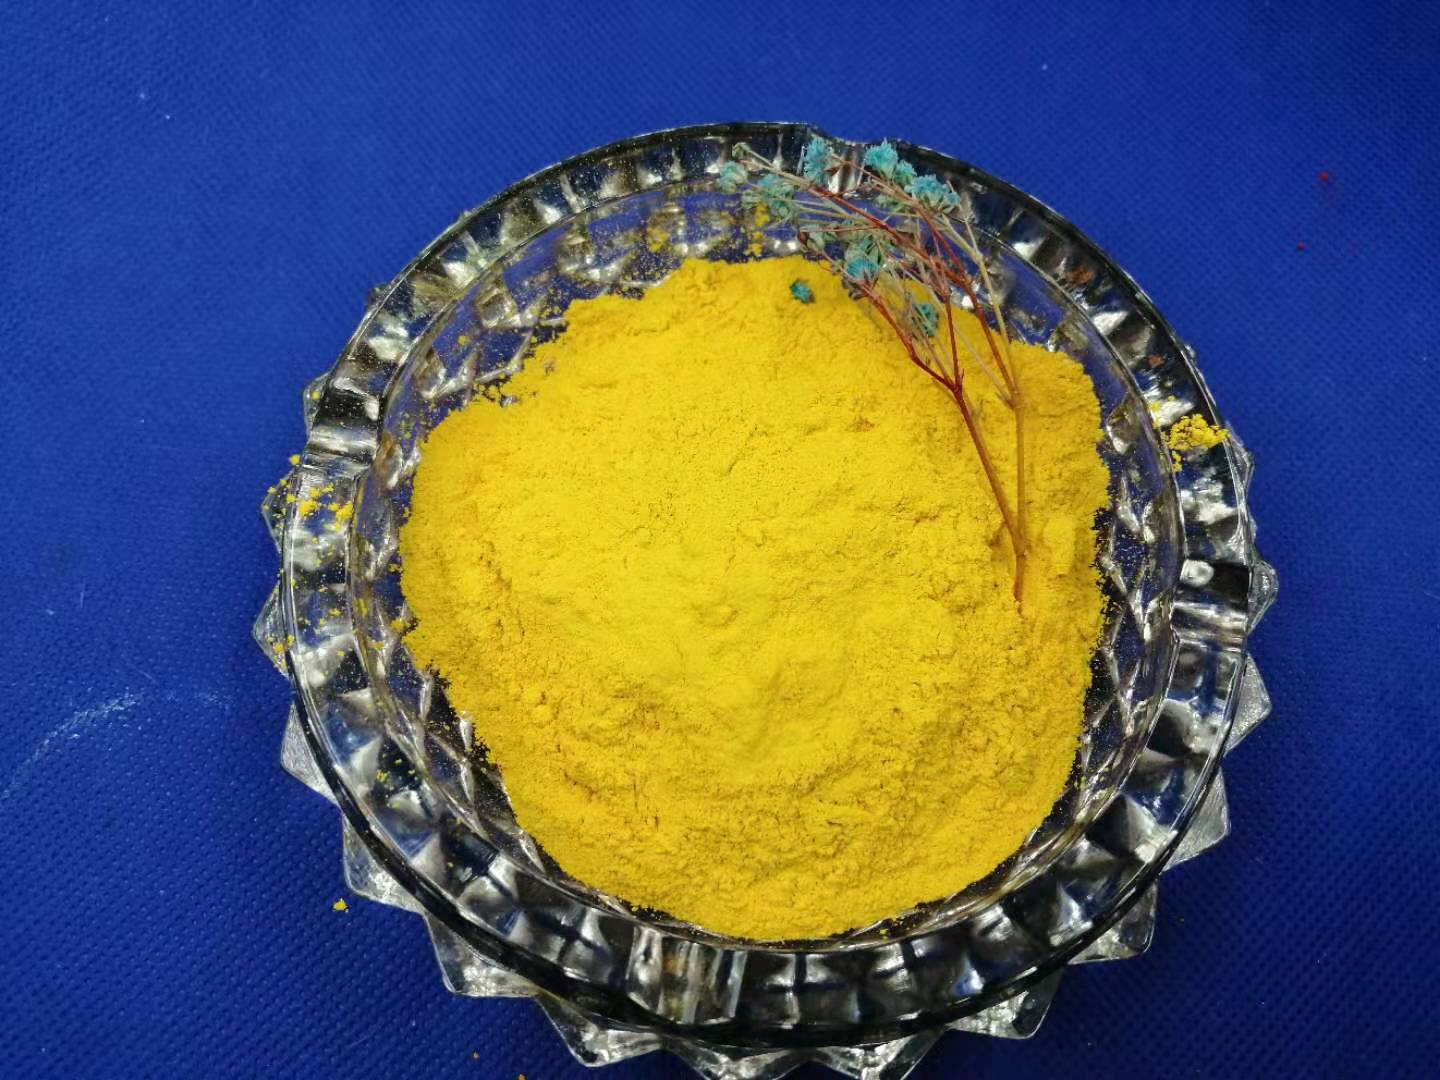 Pigment Yellow 120 For Powder Coating And Automotive Car Excellent Dispersion With High Sun Resistance And High Heat Resistance 100% Purity